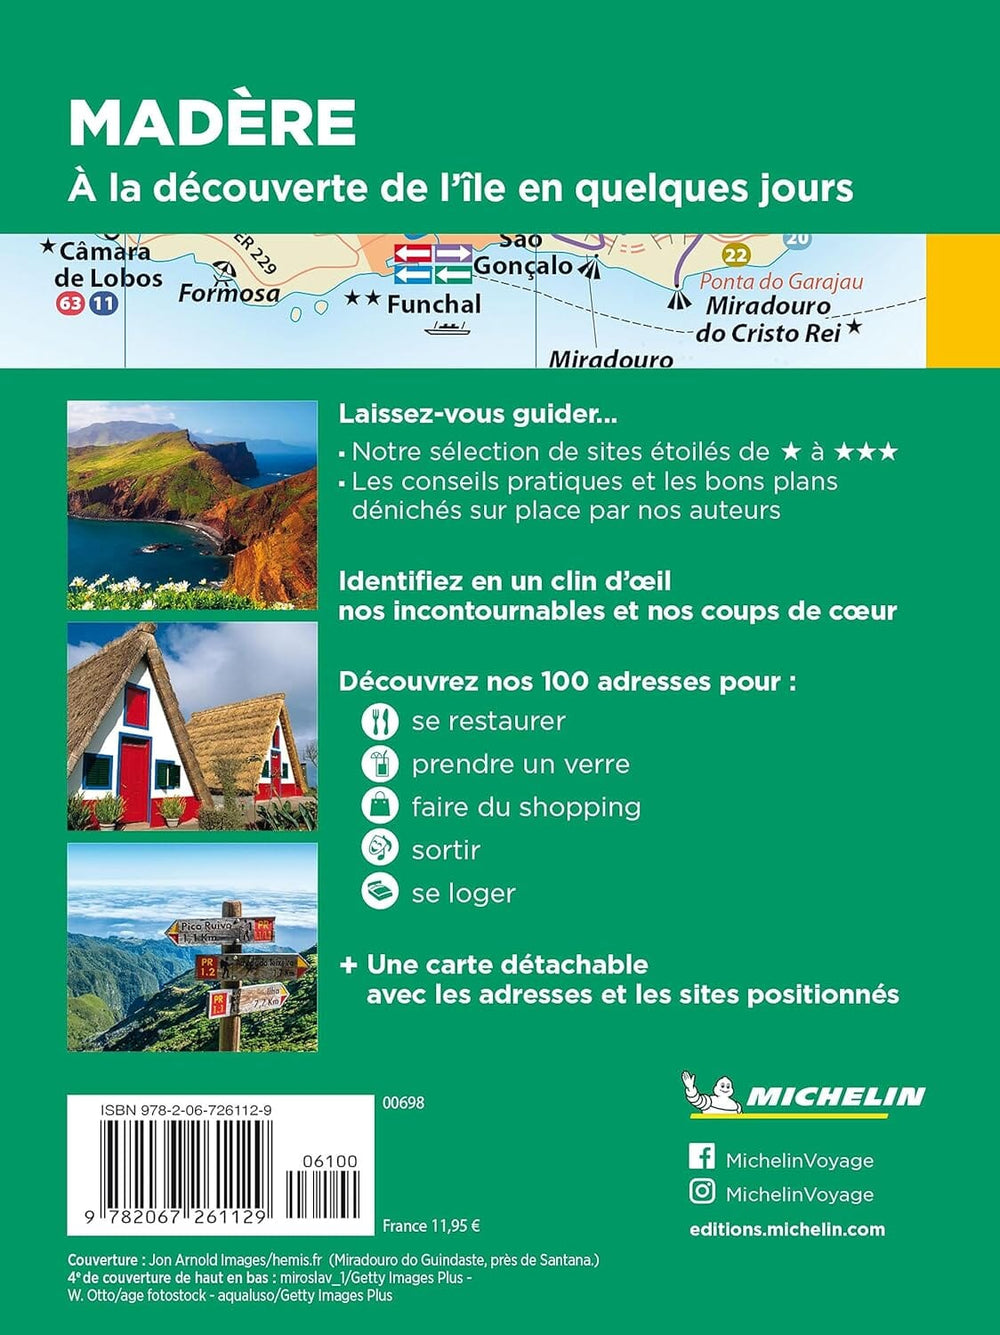 Guide Vert Week & GO - Madère - Édition 2023 | Michelin guide petit format Michelin 